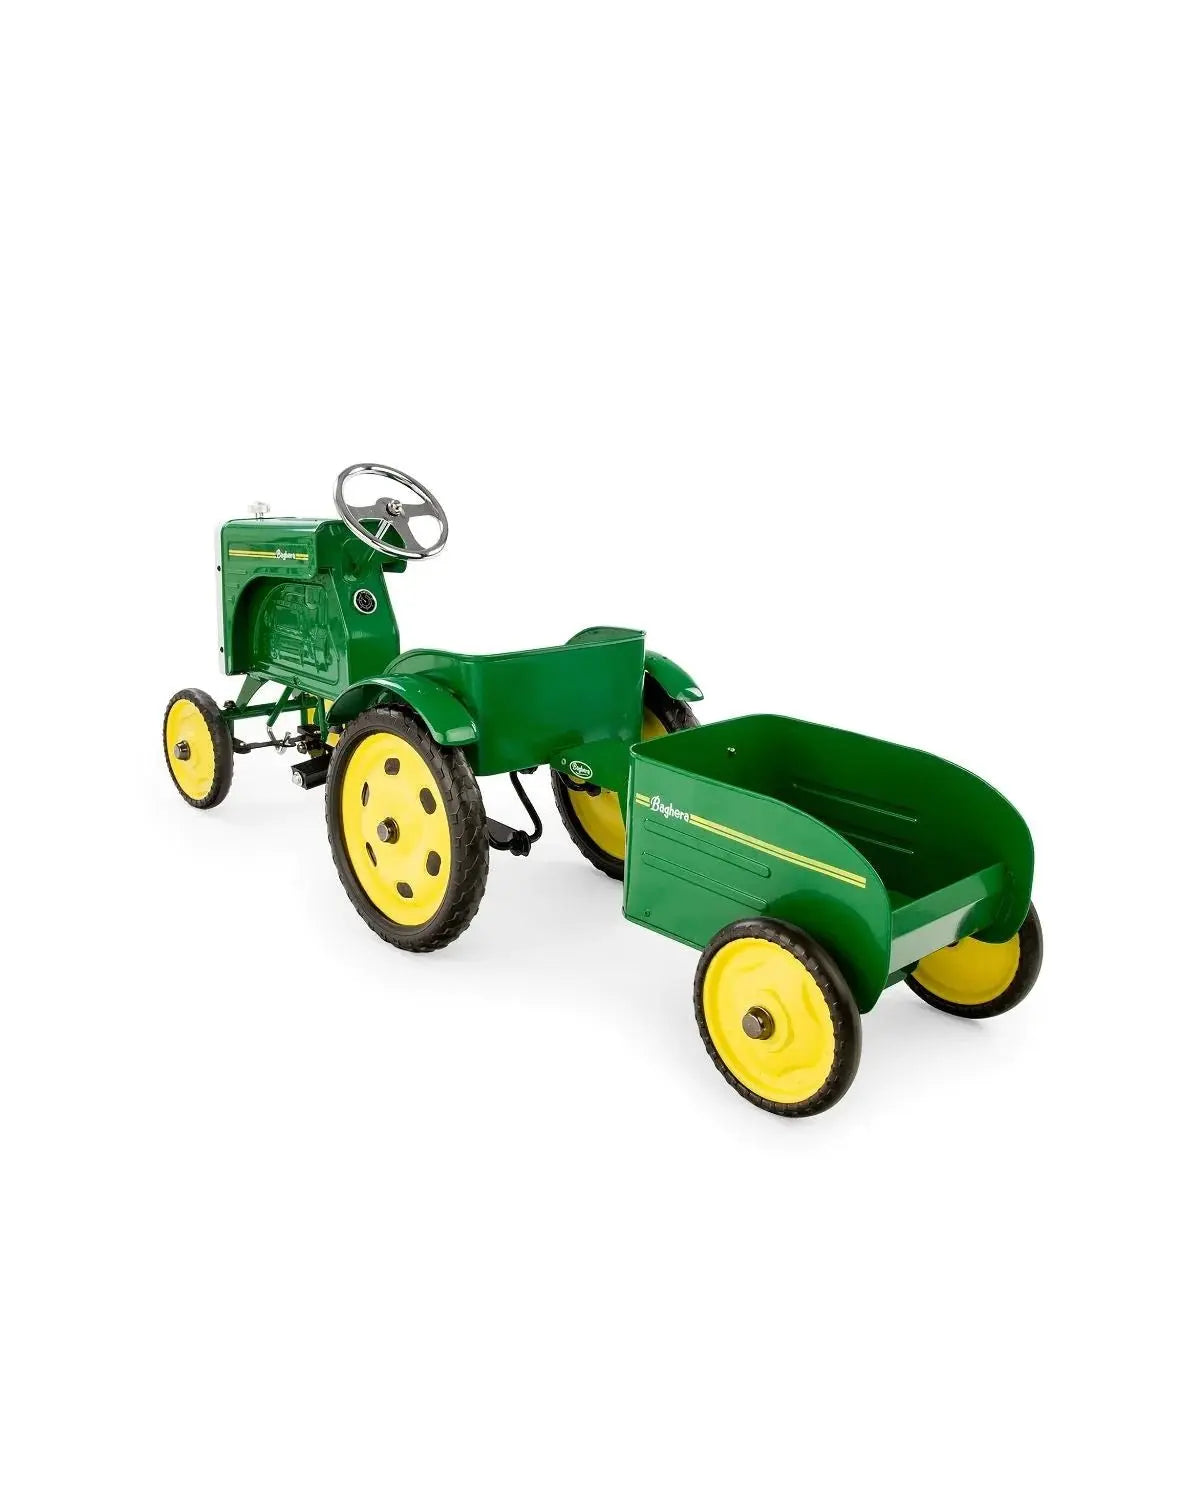 Tractor Ride-on Trailer Only for 1936 Model, 28x21.7x15.7", Heavy-Duty Hauler Attachment  Baghera   